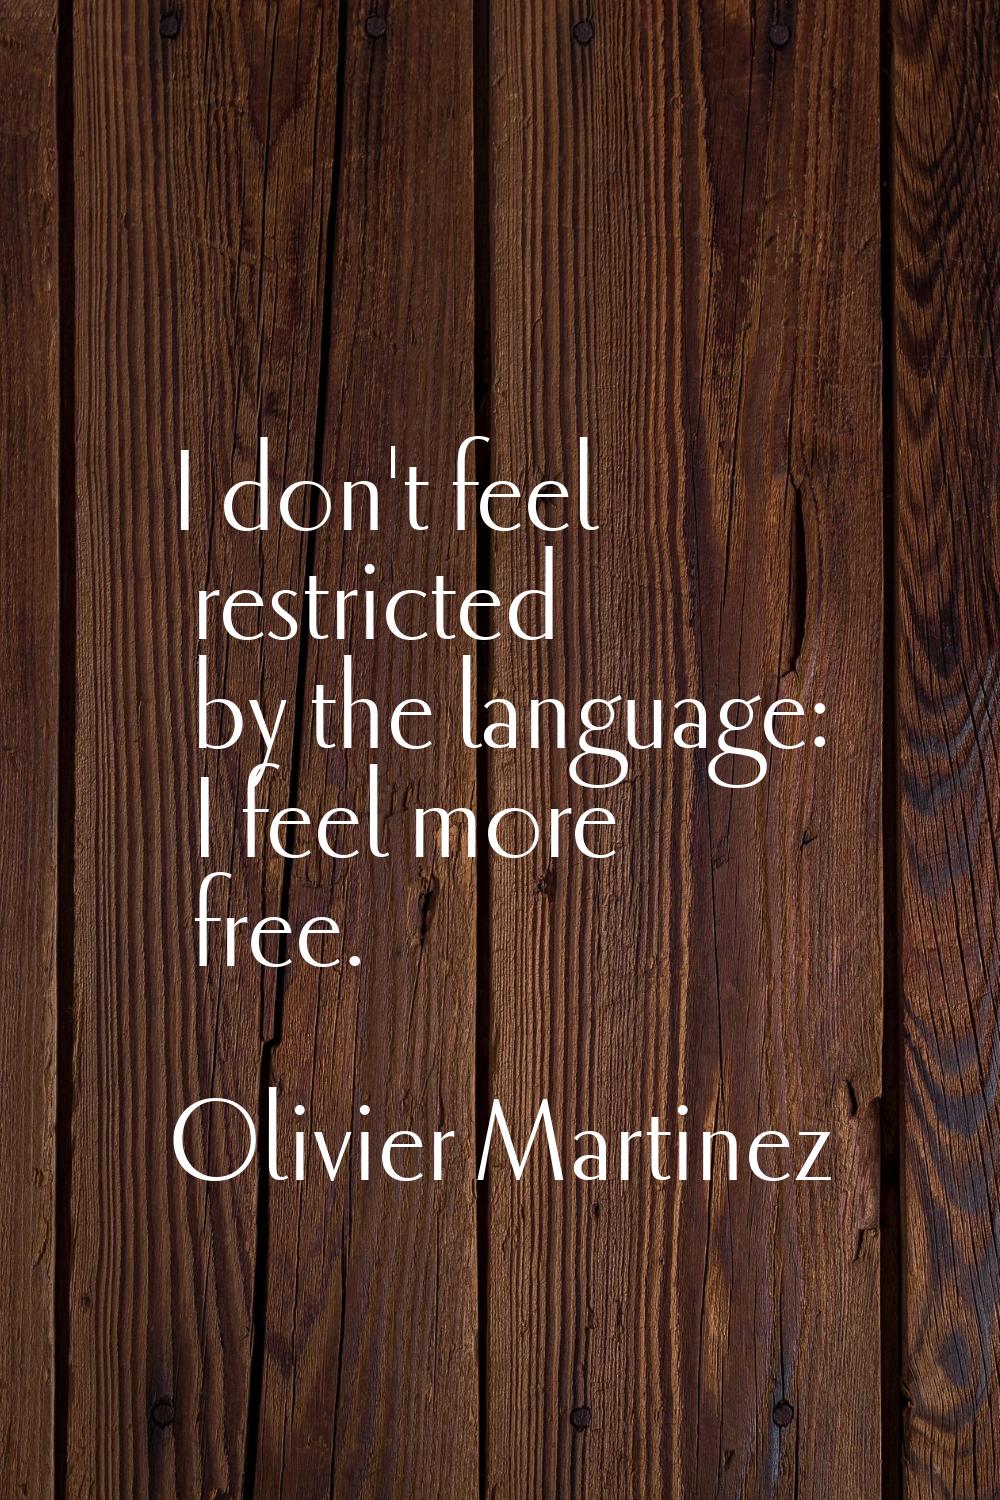 I don't feel restricted by the language: I feel more free.